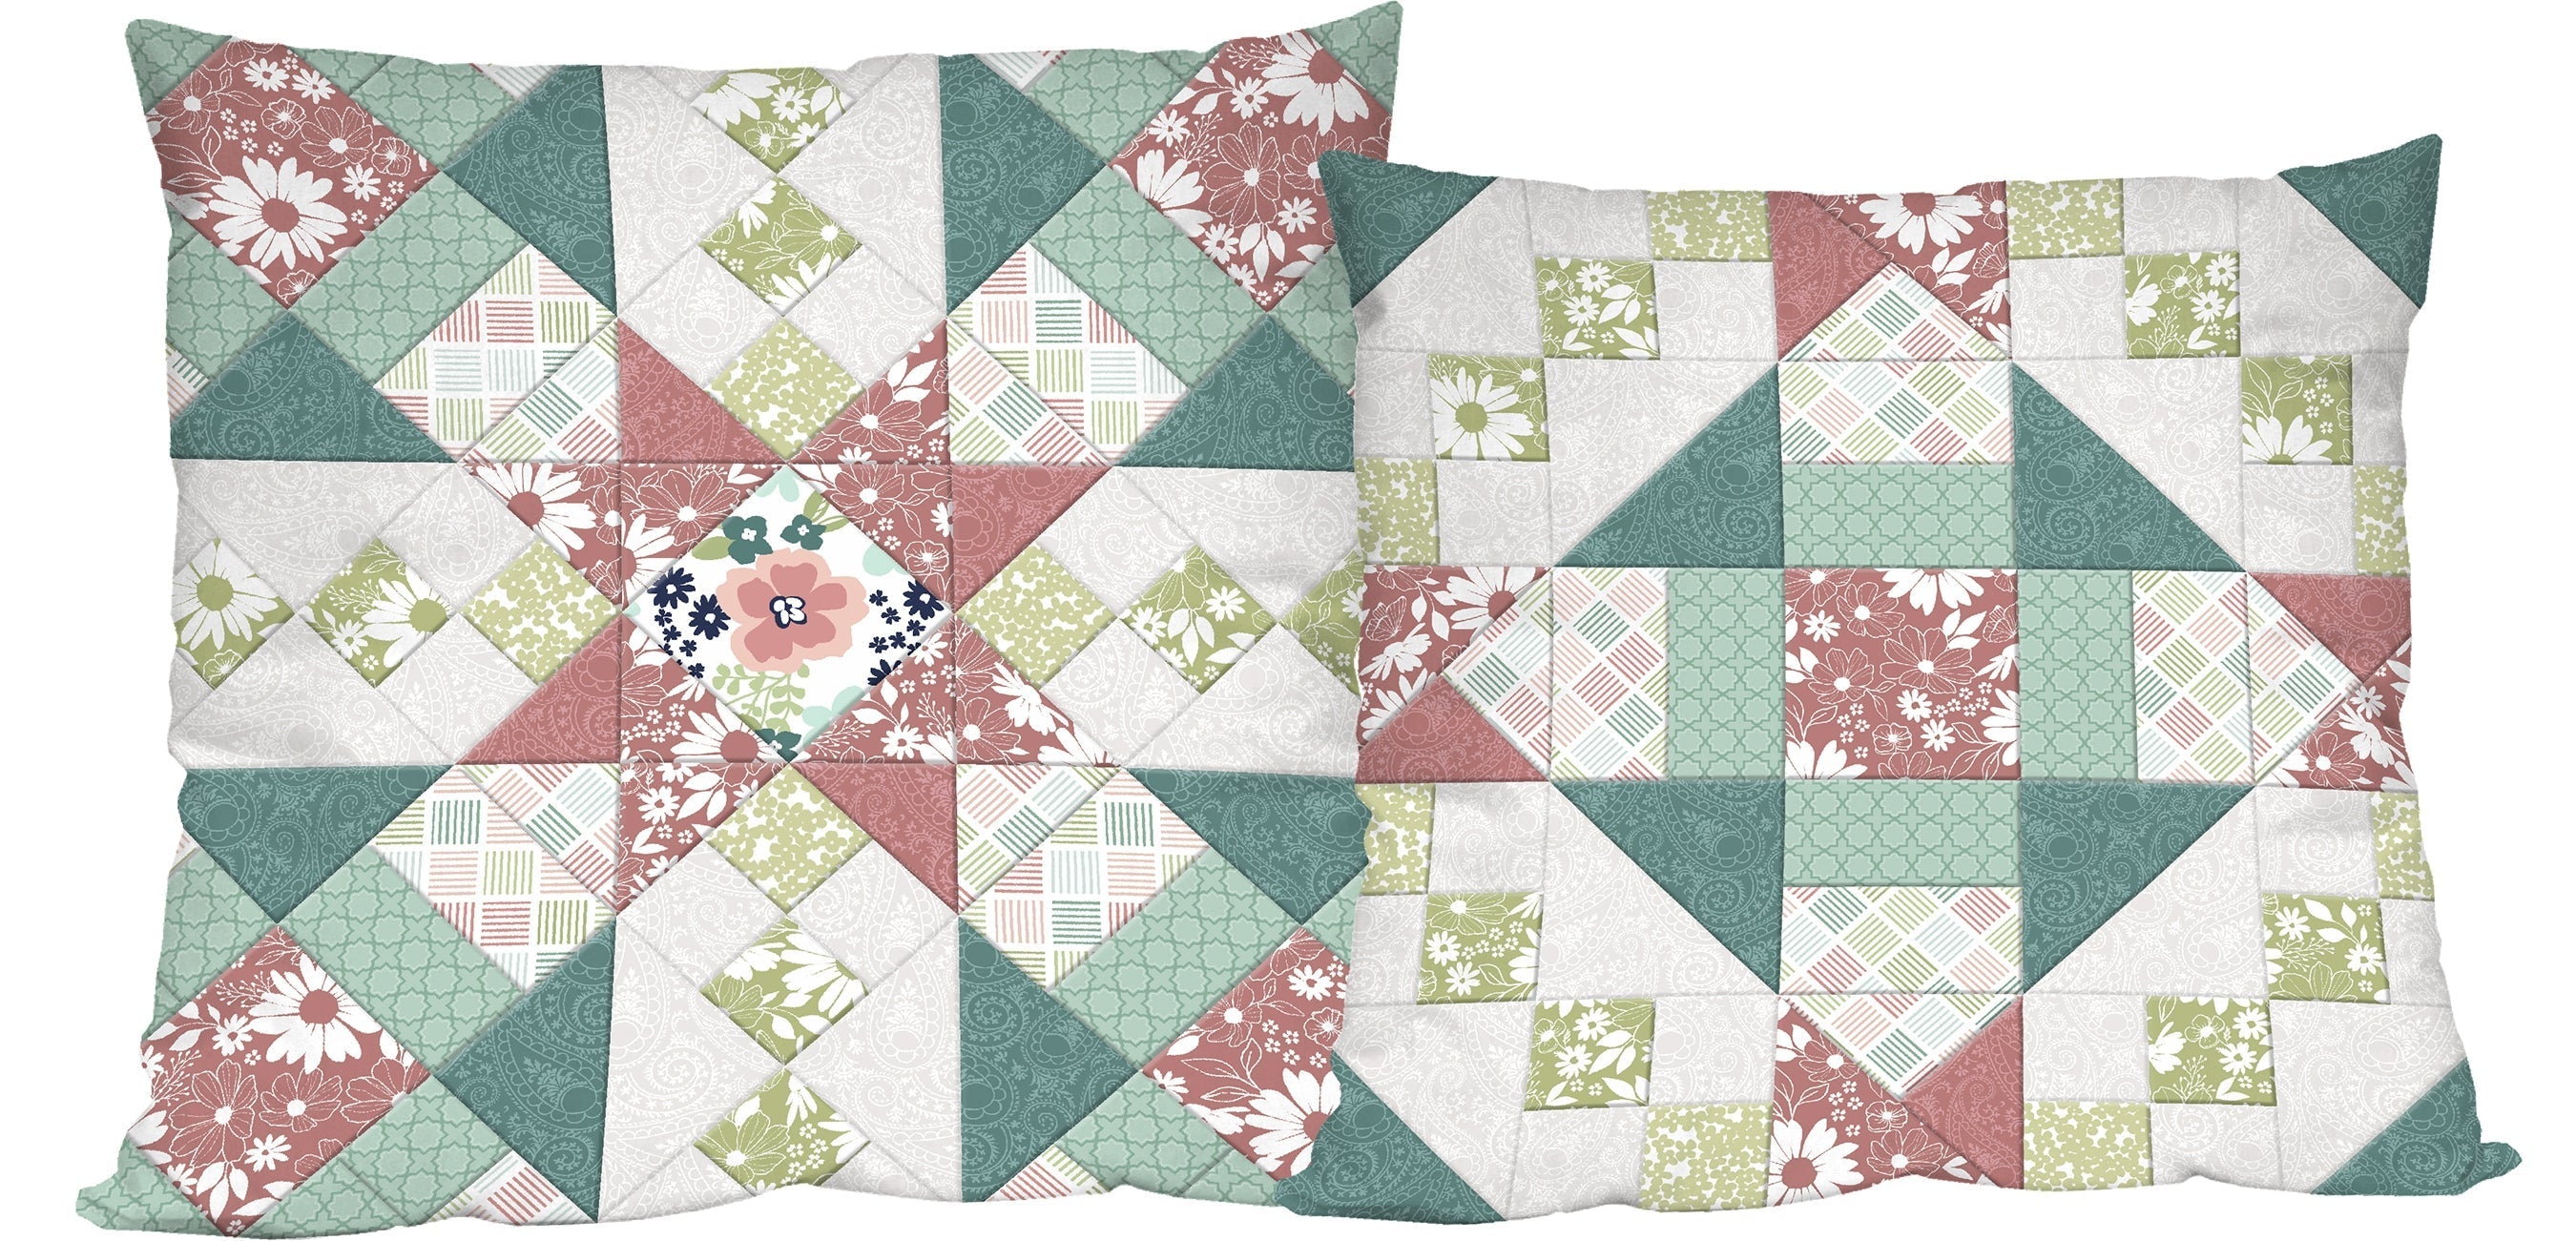 Basic Patchwork Pillows - Free Digital Download-Wilmington Prints-My Favorite Quilt Store